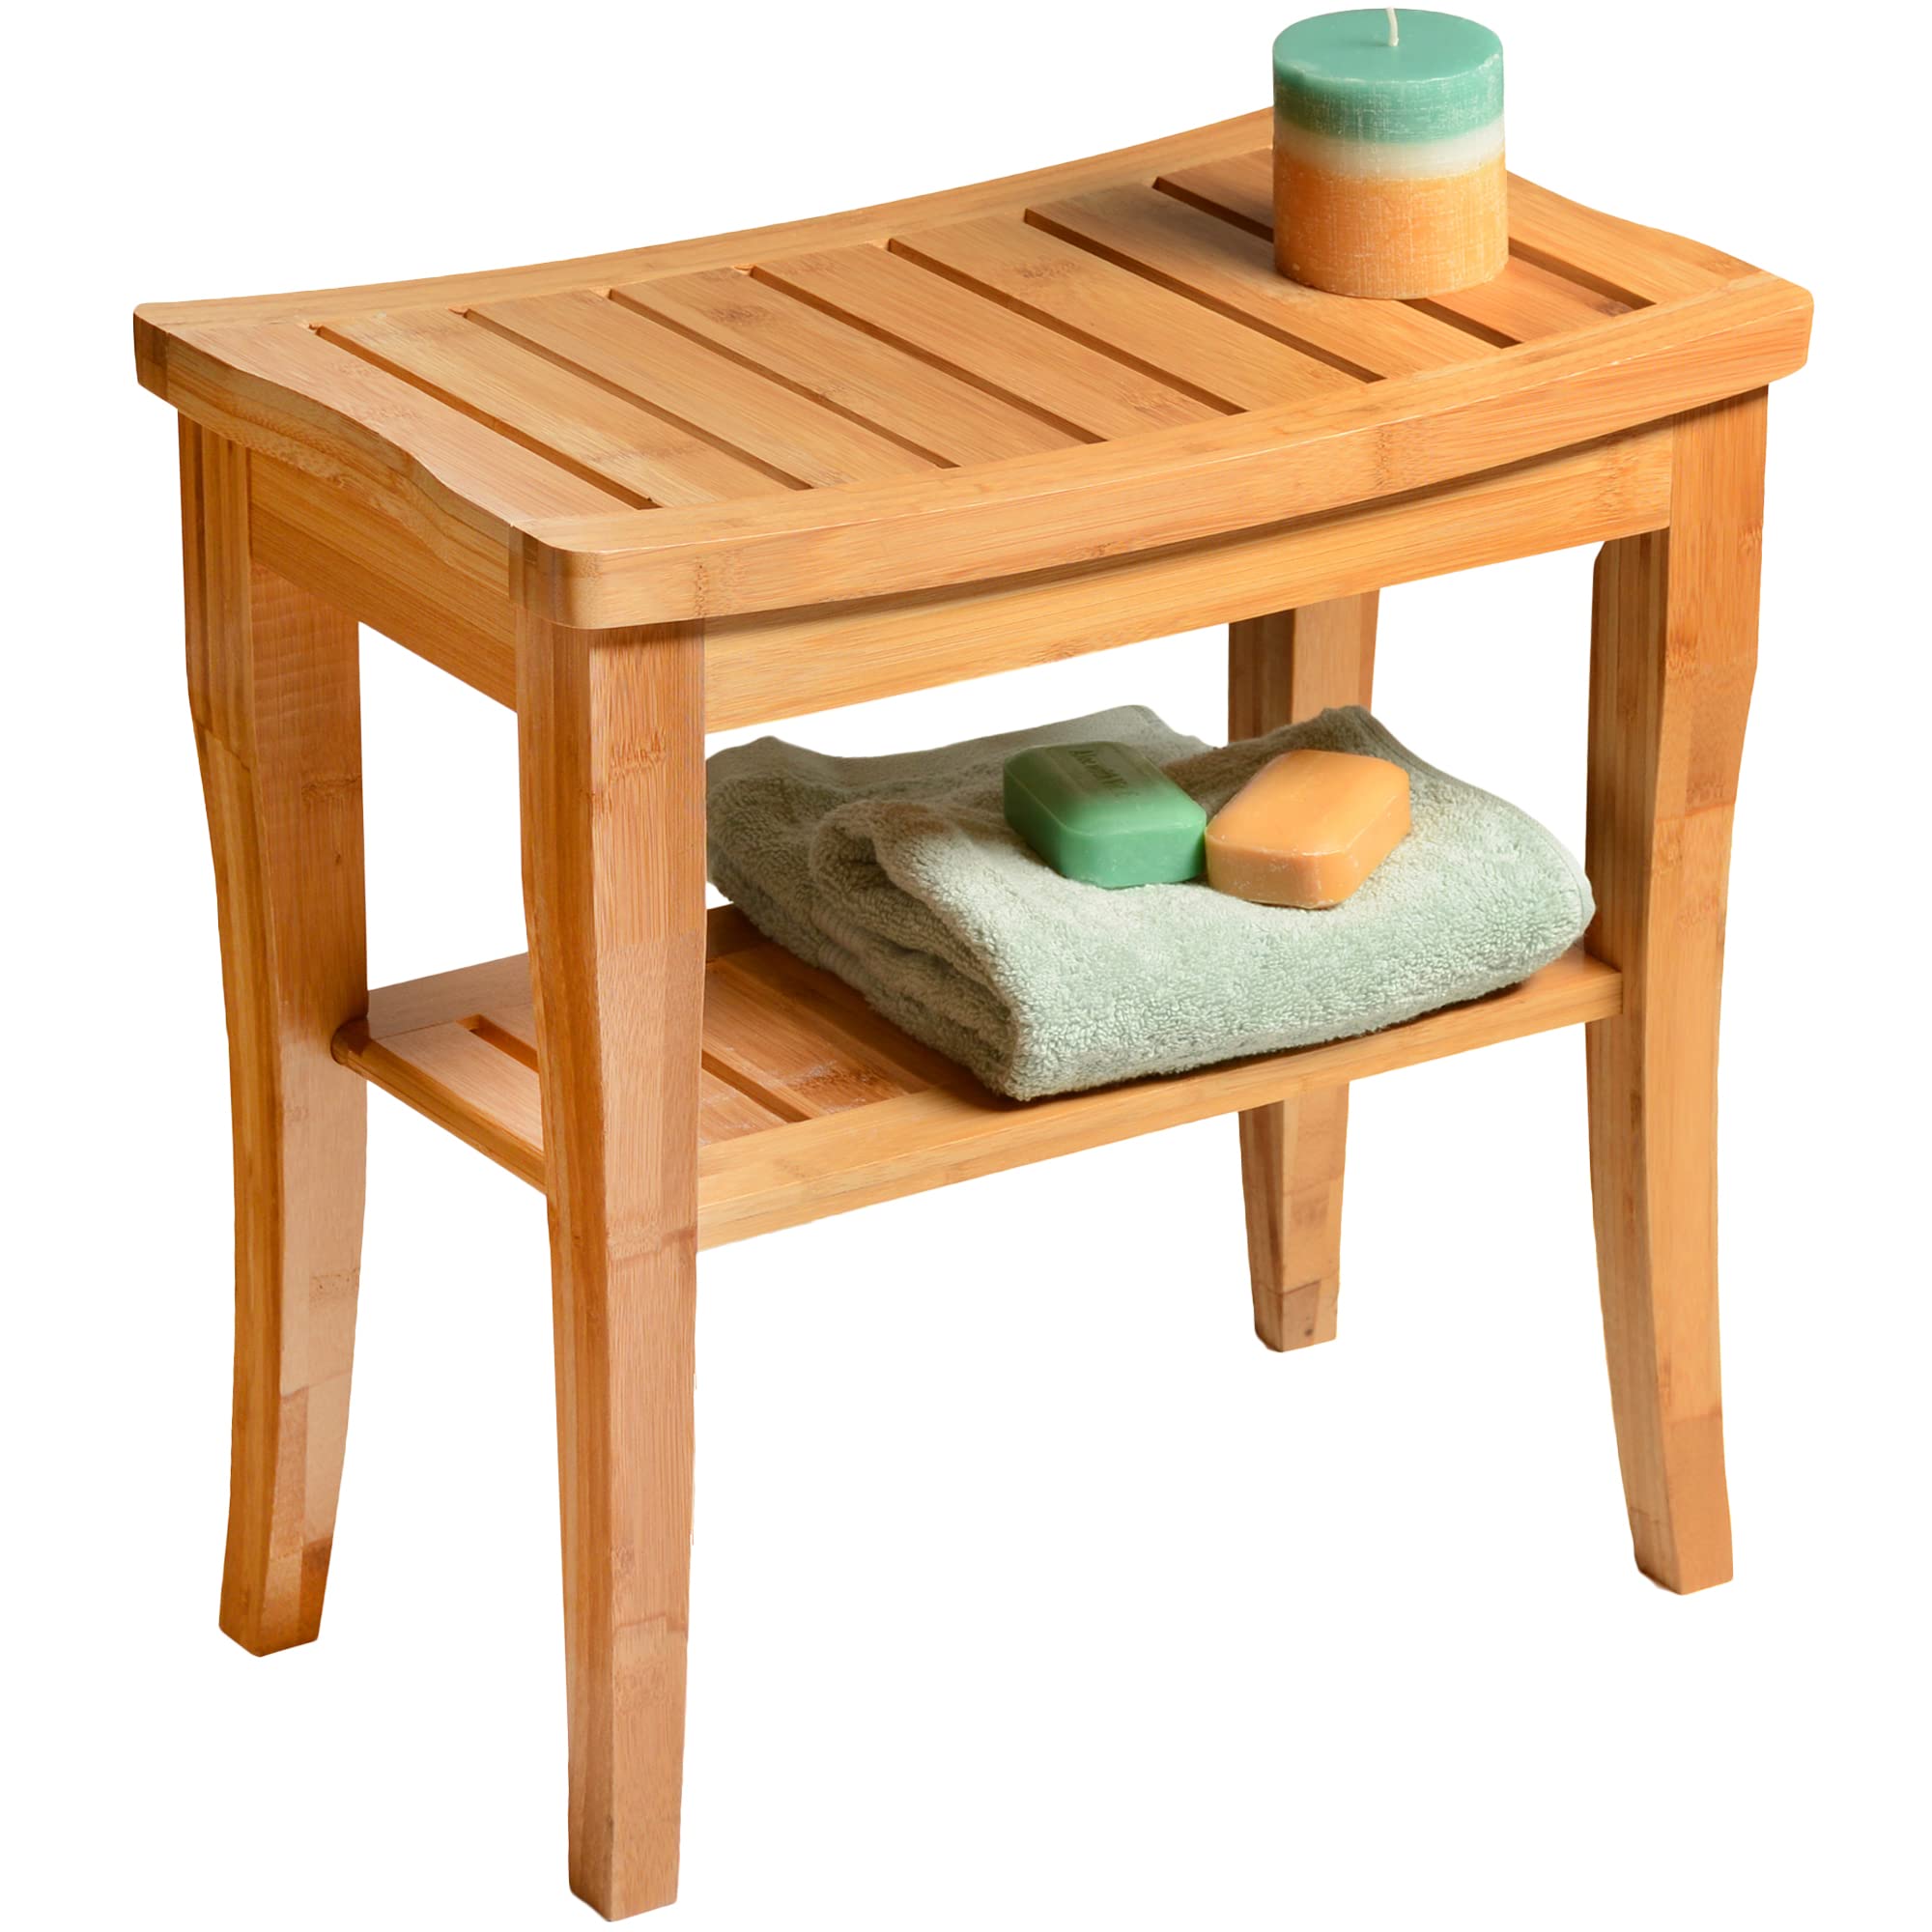 Bamboo Shower Bench Spa Stool - Wood 2-Tier Seat, Foot Rest Shaving Stool with Non-Slip Feet + Storage Shelf - Seat or Organizer for Bathroom, Living Room, Bedroom and Garden D�cor  - Like New